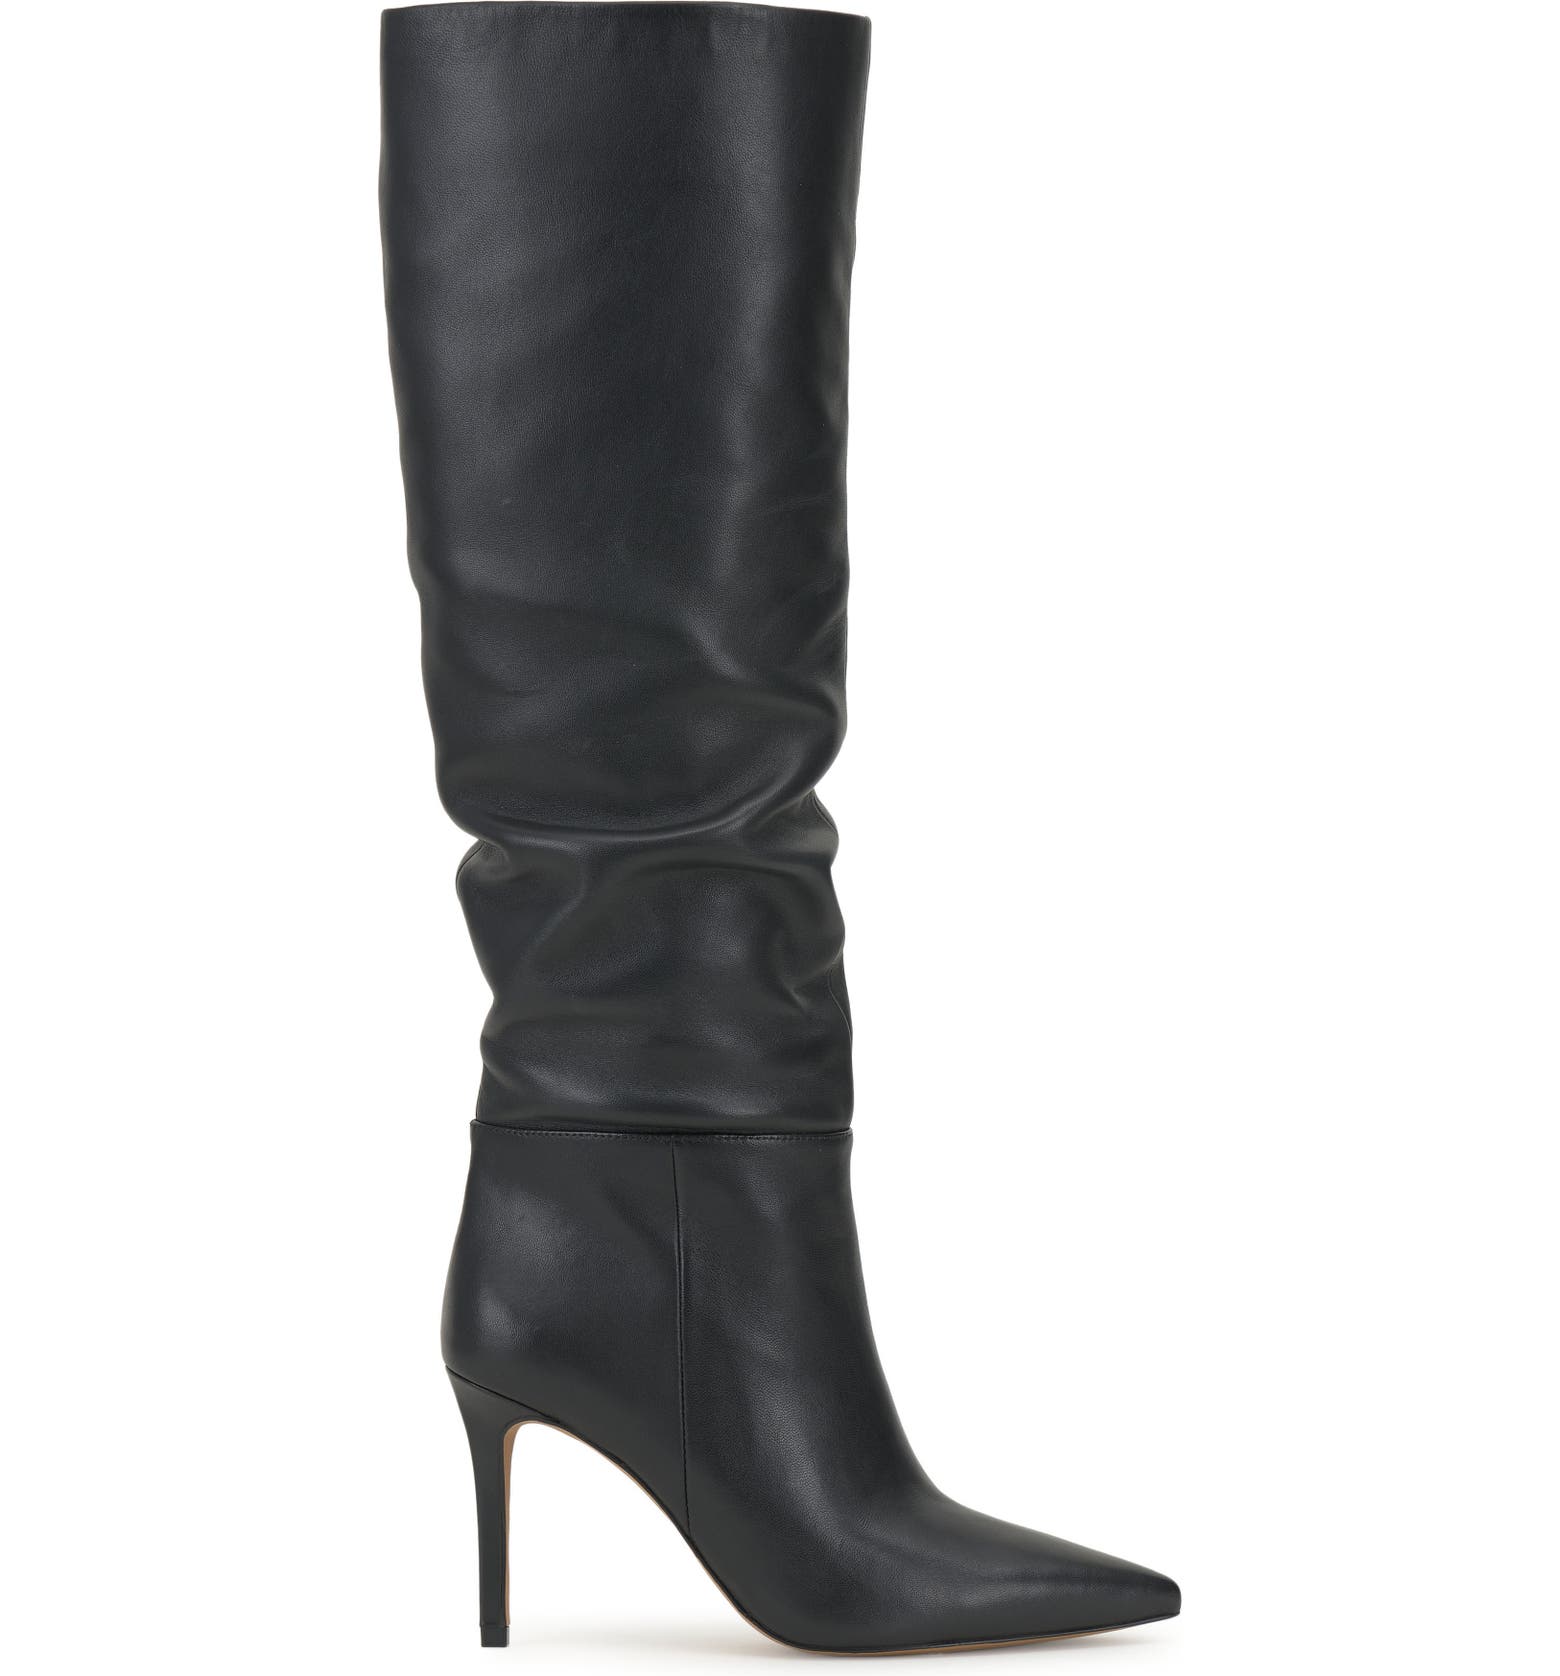 Vince Camuto Kashleigh Pointed Toe Knee High Boot (Women) | Nordstrom